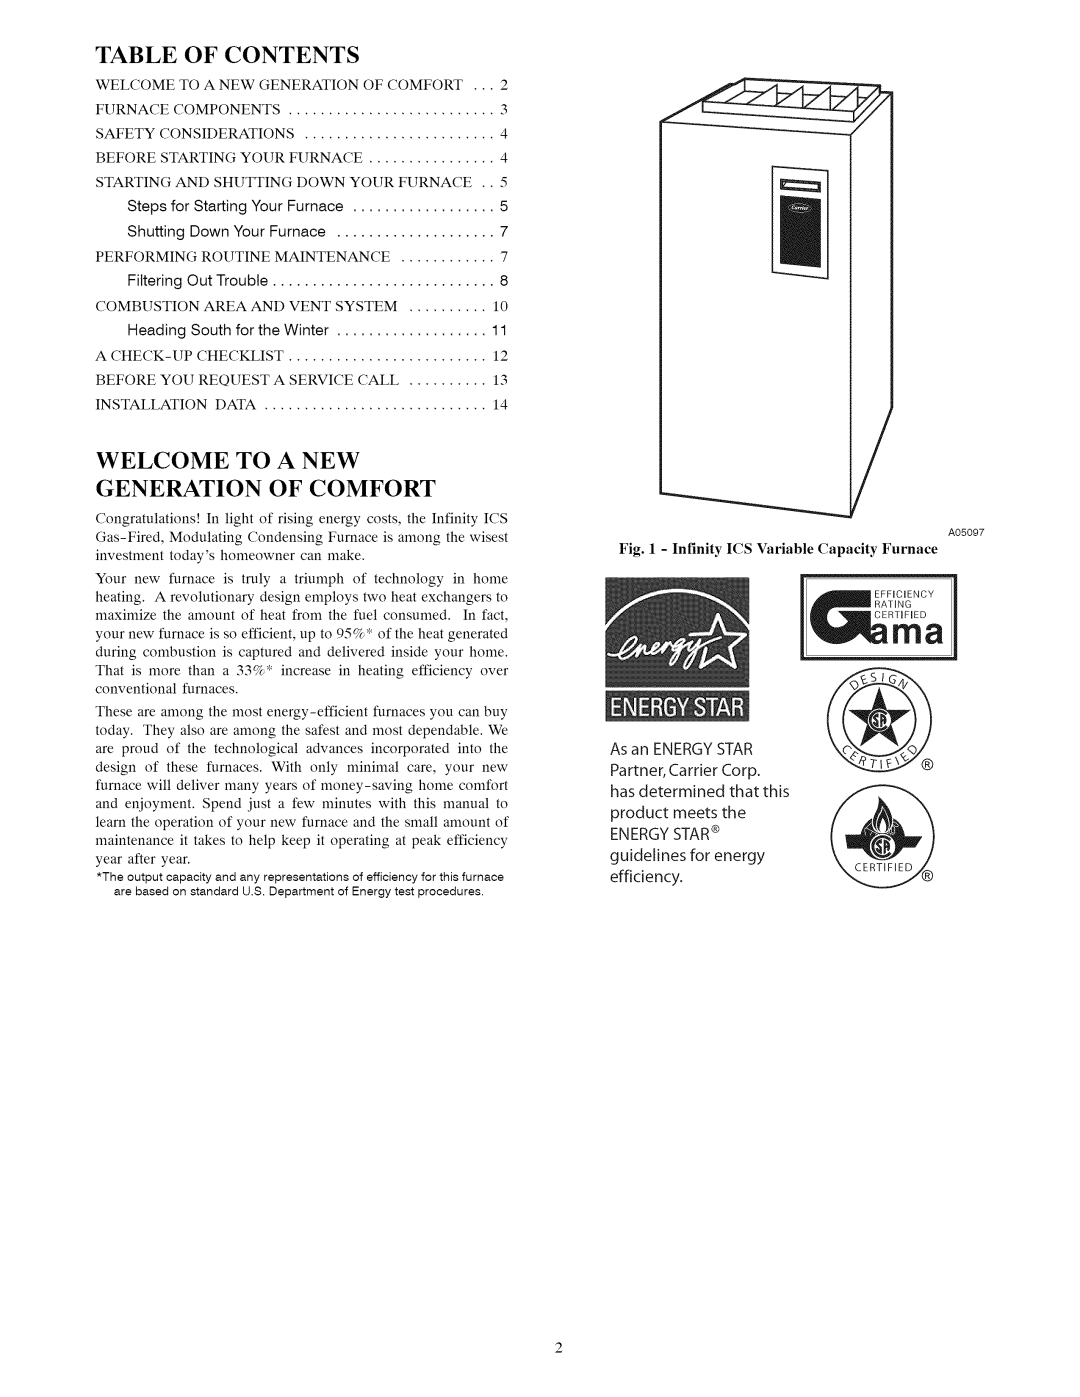 Carrier 58MVC owner manual Contents, Welcome To A New Generation Of Comfort, Infinity ICS Variable Capacity Furnace 